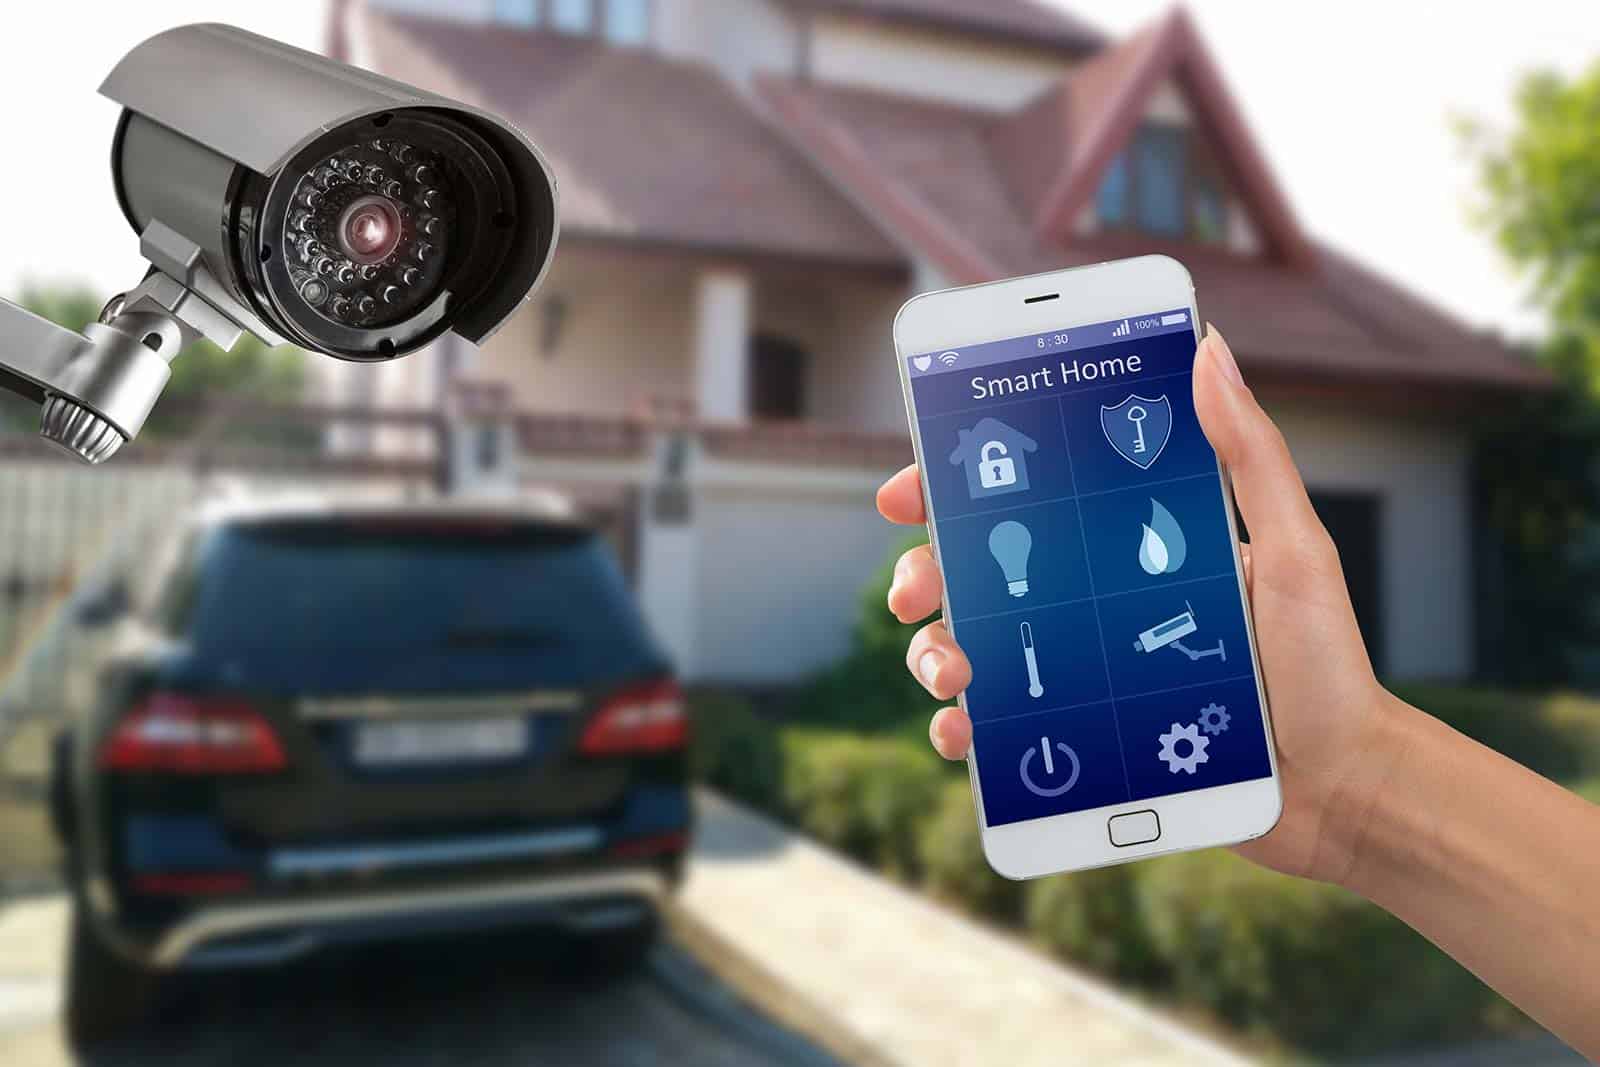 Image of smart phone with security options, a security camera, home and car